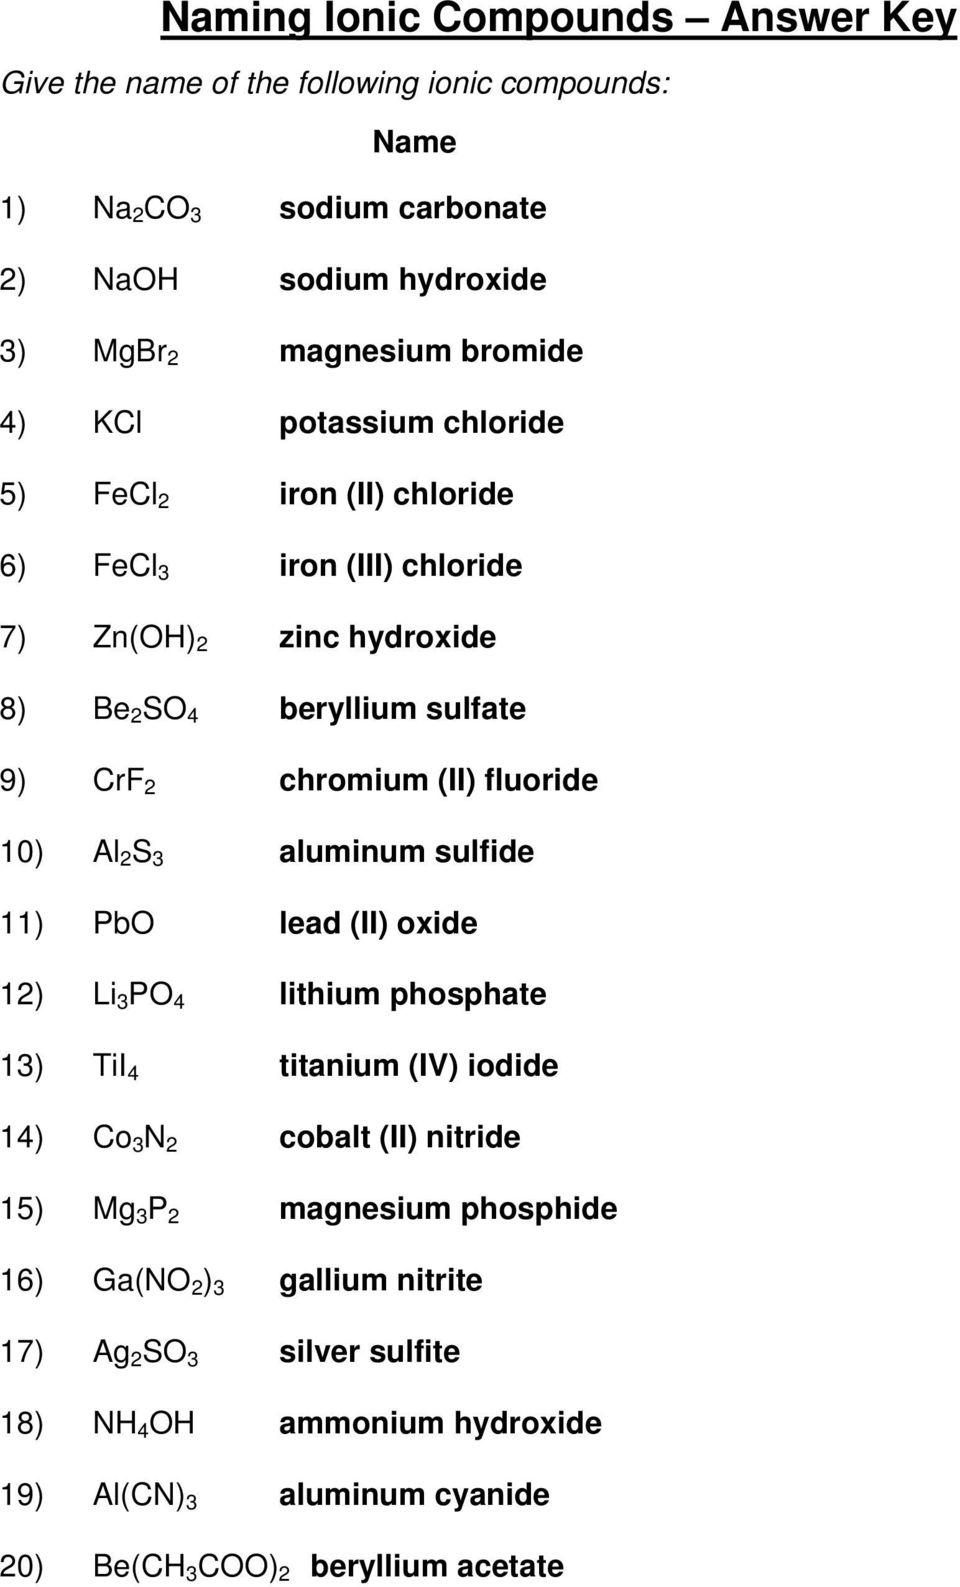 Naming Ionic Compounds Answer Key Pdf Free Download